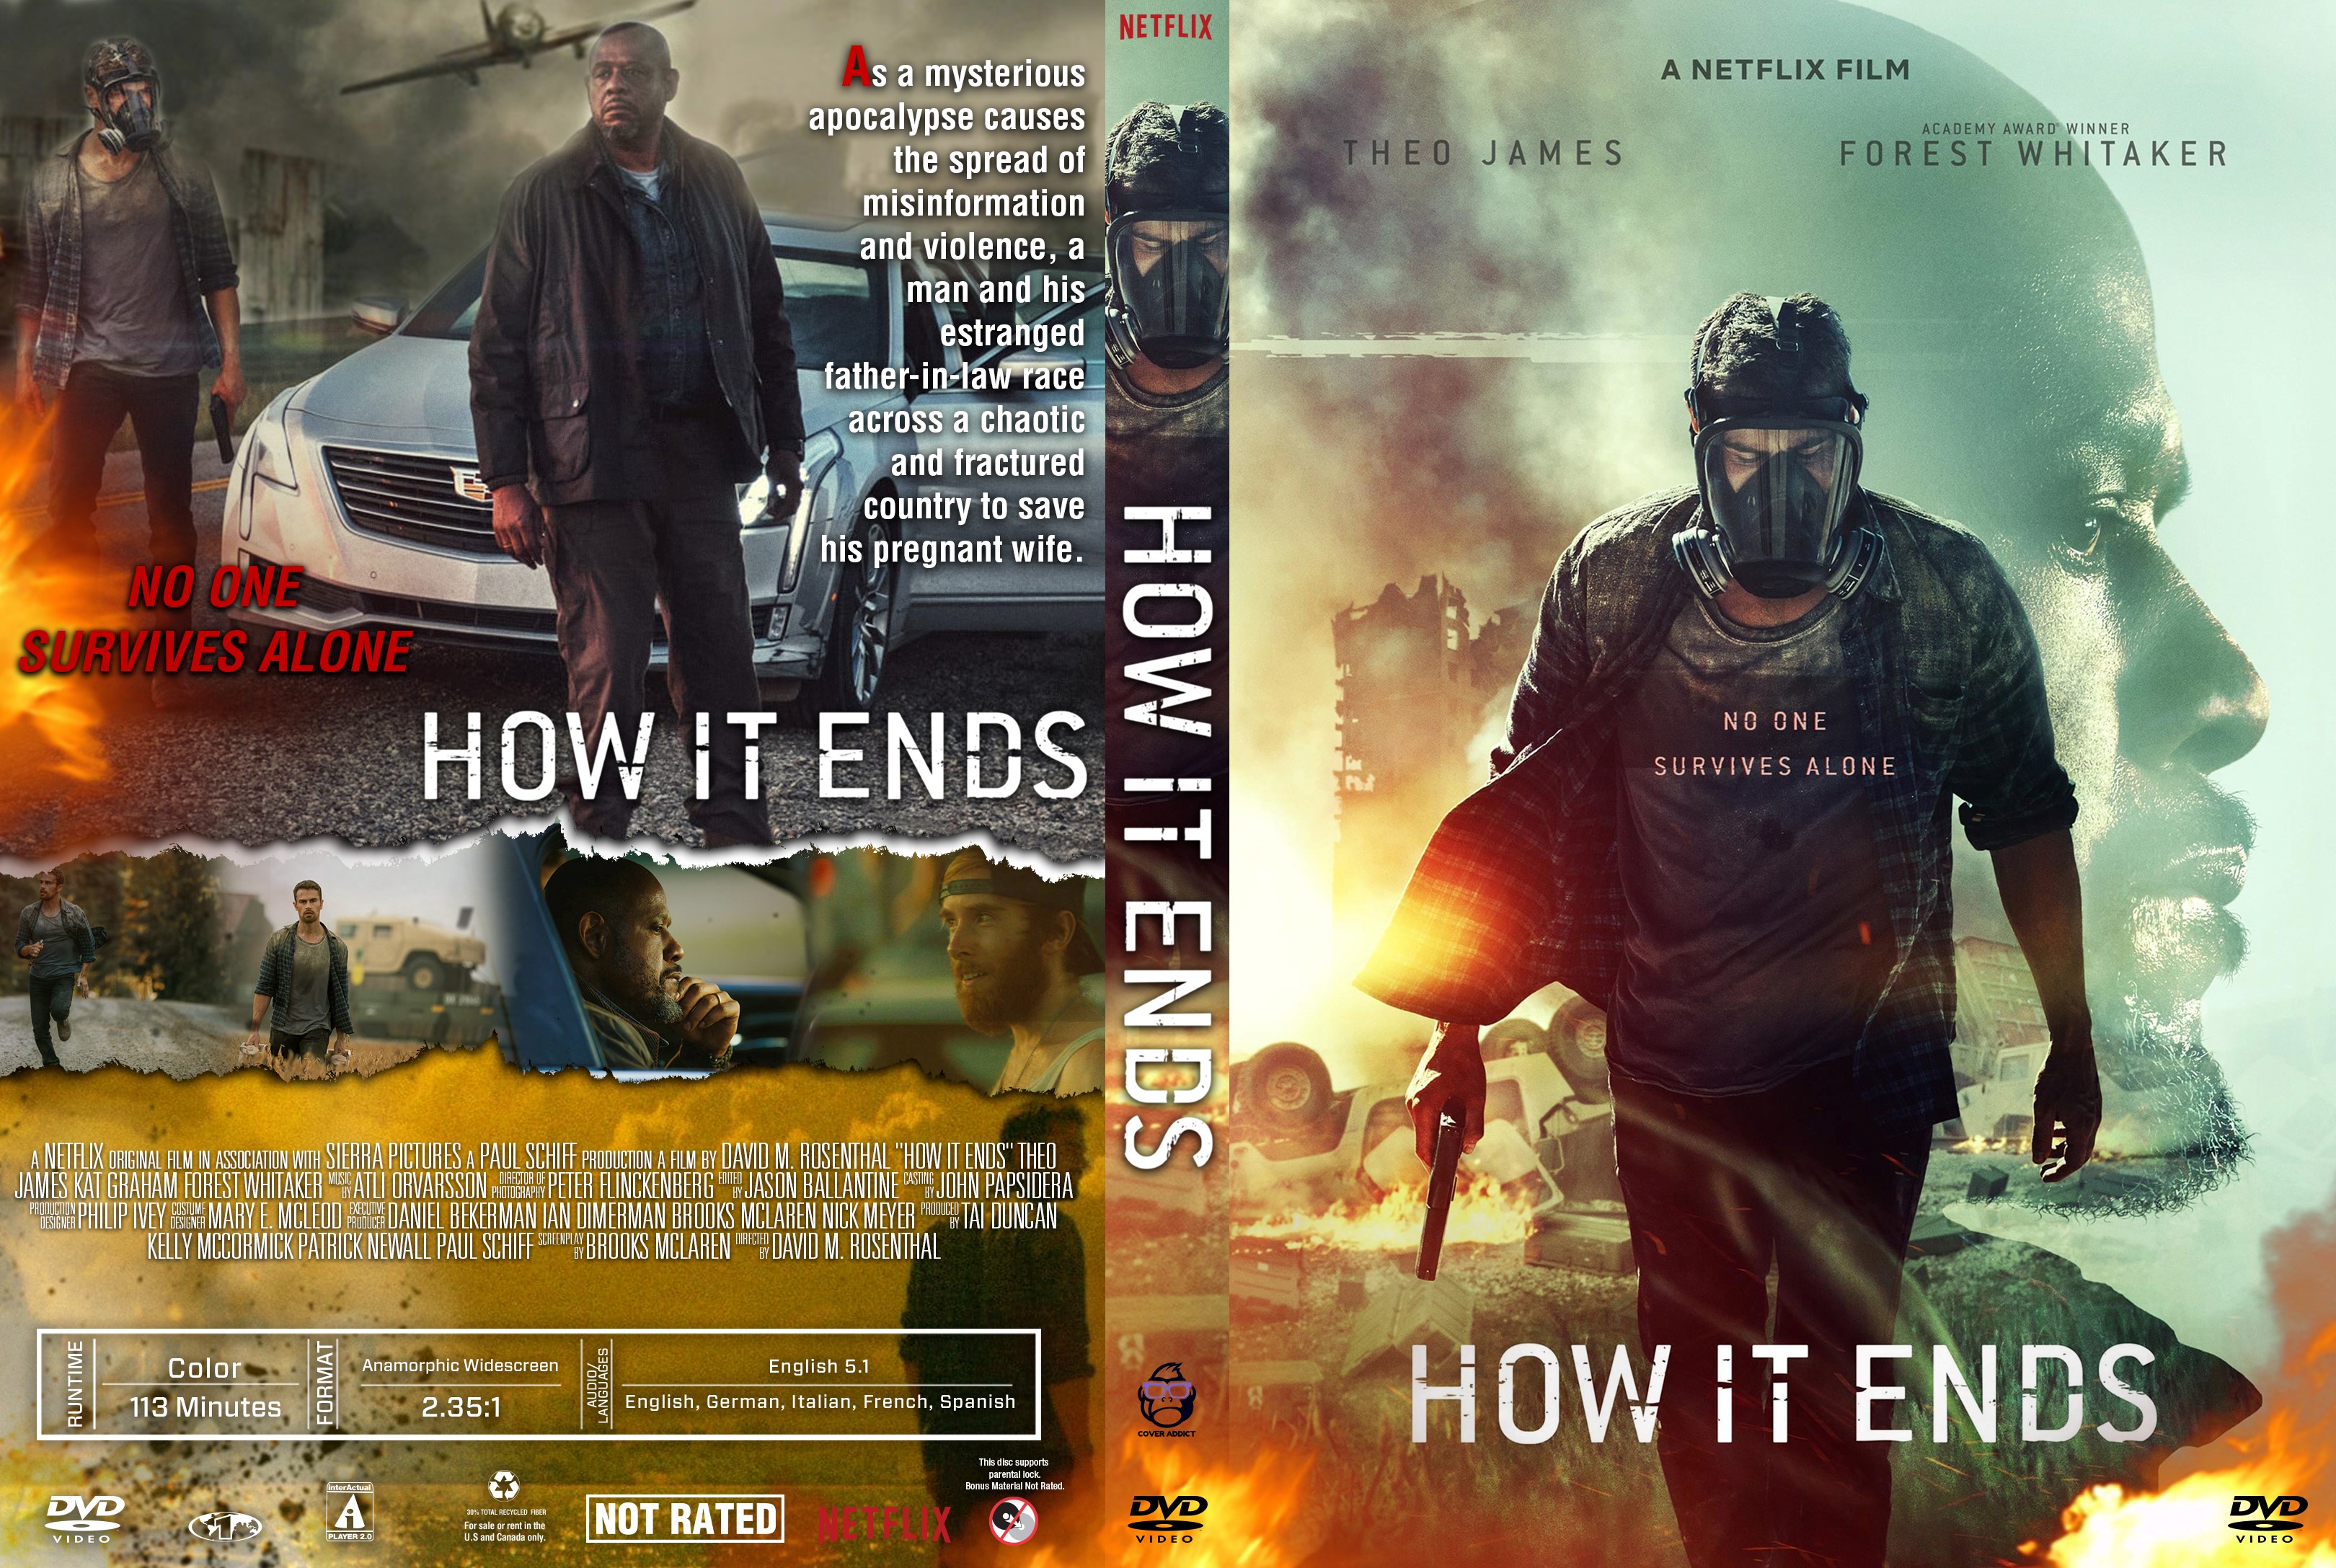 How It Ends DVD Cover - Cover Addict - DVD, Bluray Covers 